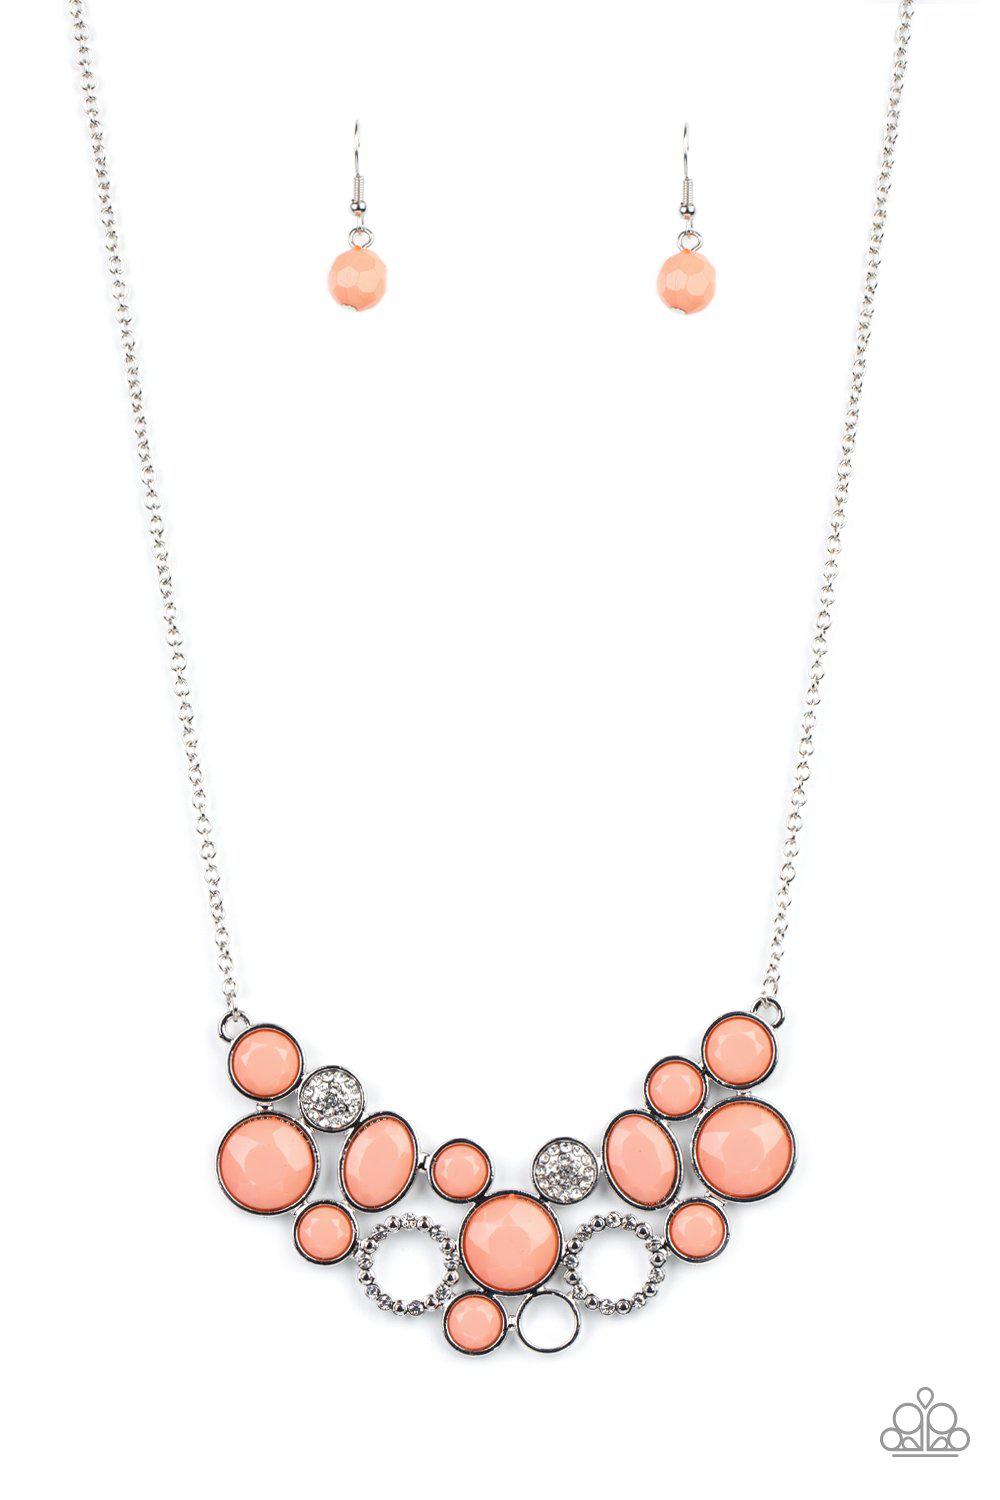 Extra Eloquent Coral and White Rhinestone Necklace - Paparazzi Accessories- lightbox - CarasShop.com - $5 Jewelry by Cara Jewels